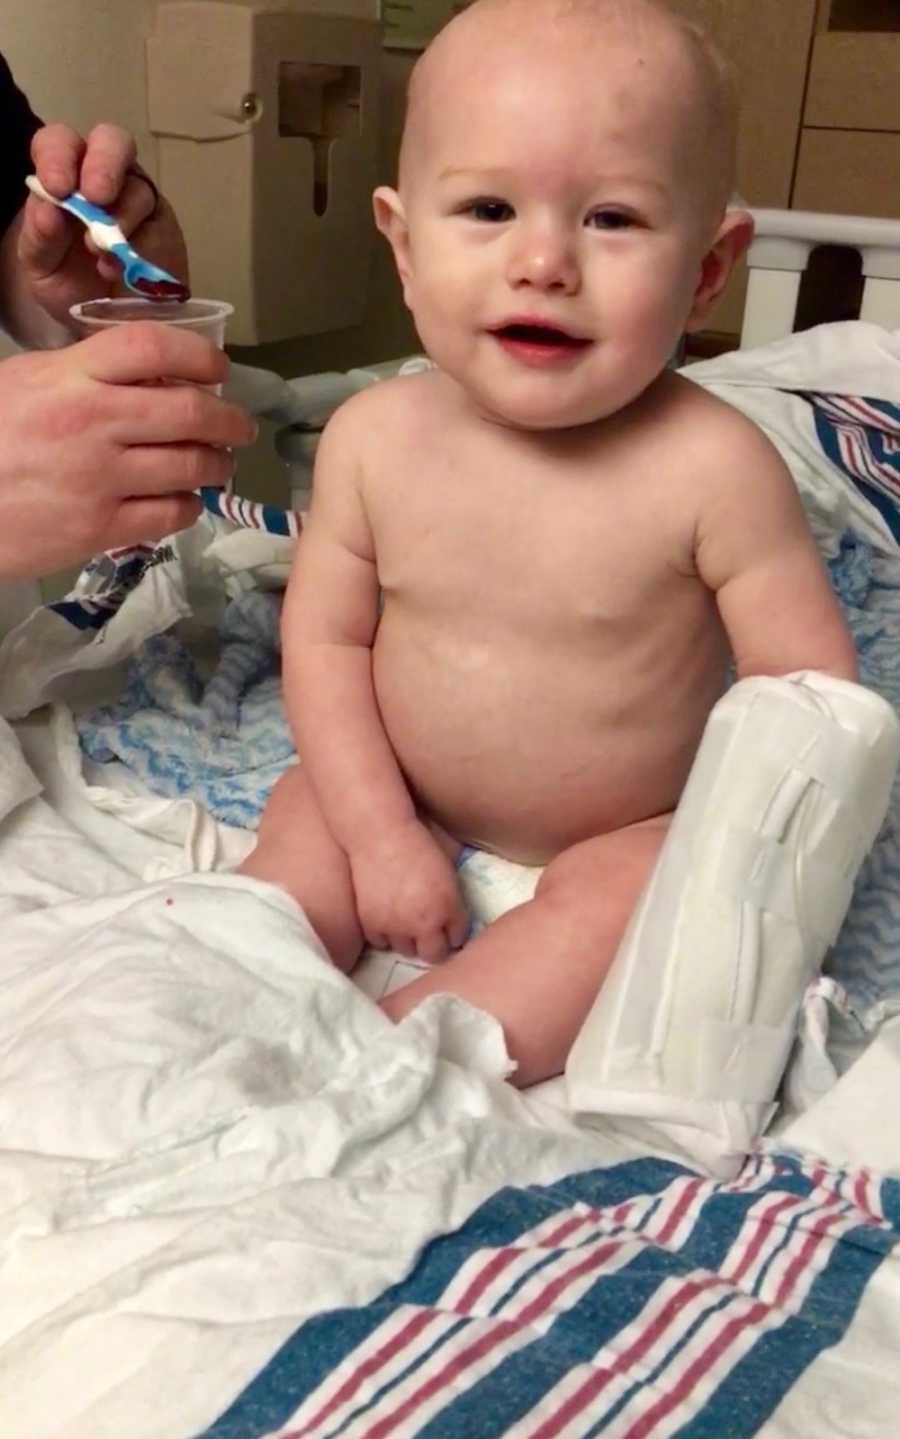 Baby with Transverse Myelitis sits up in hospital bed as someone holds up spoonful of Jell-O near his face